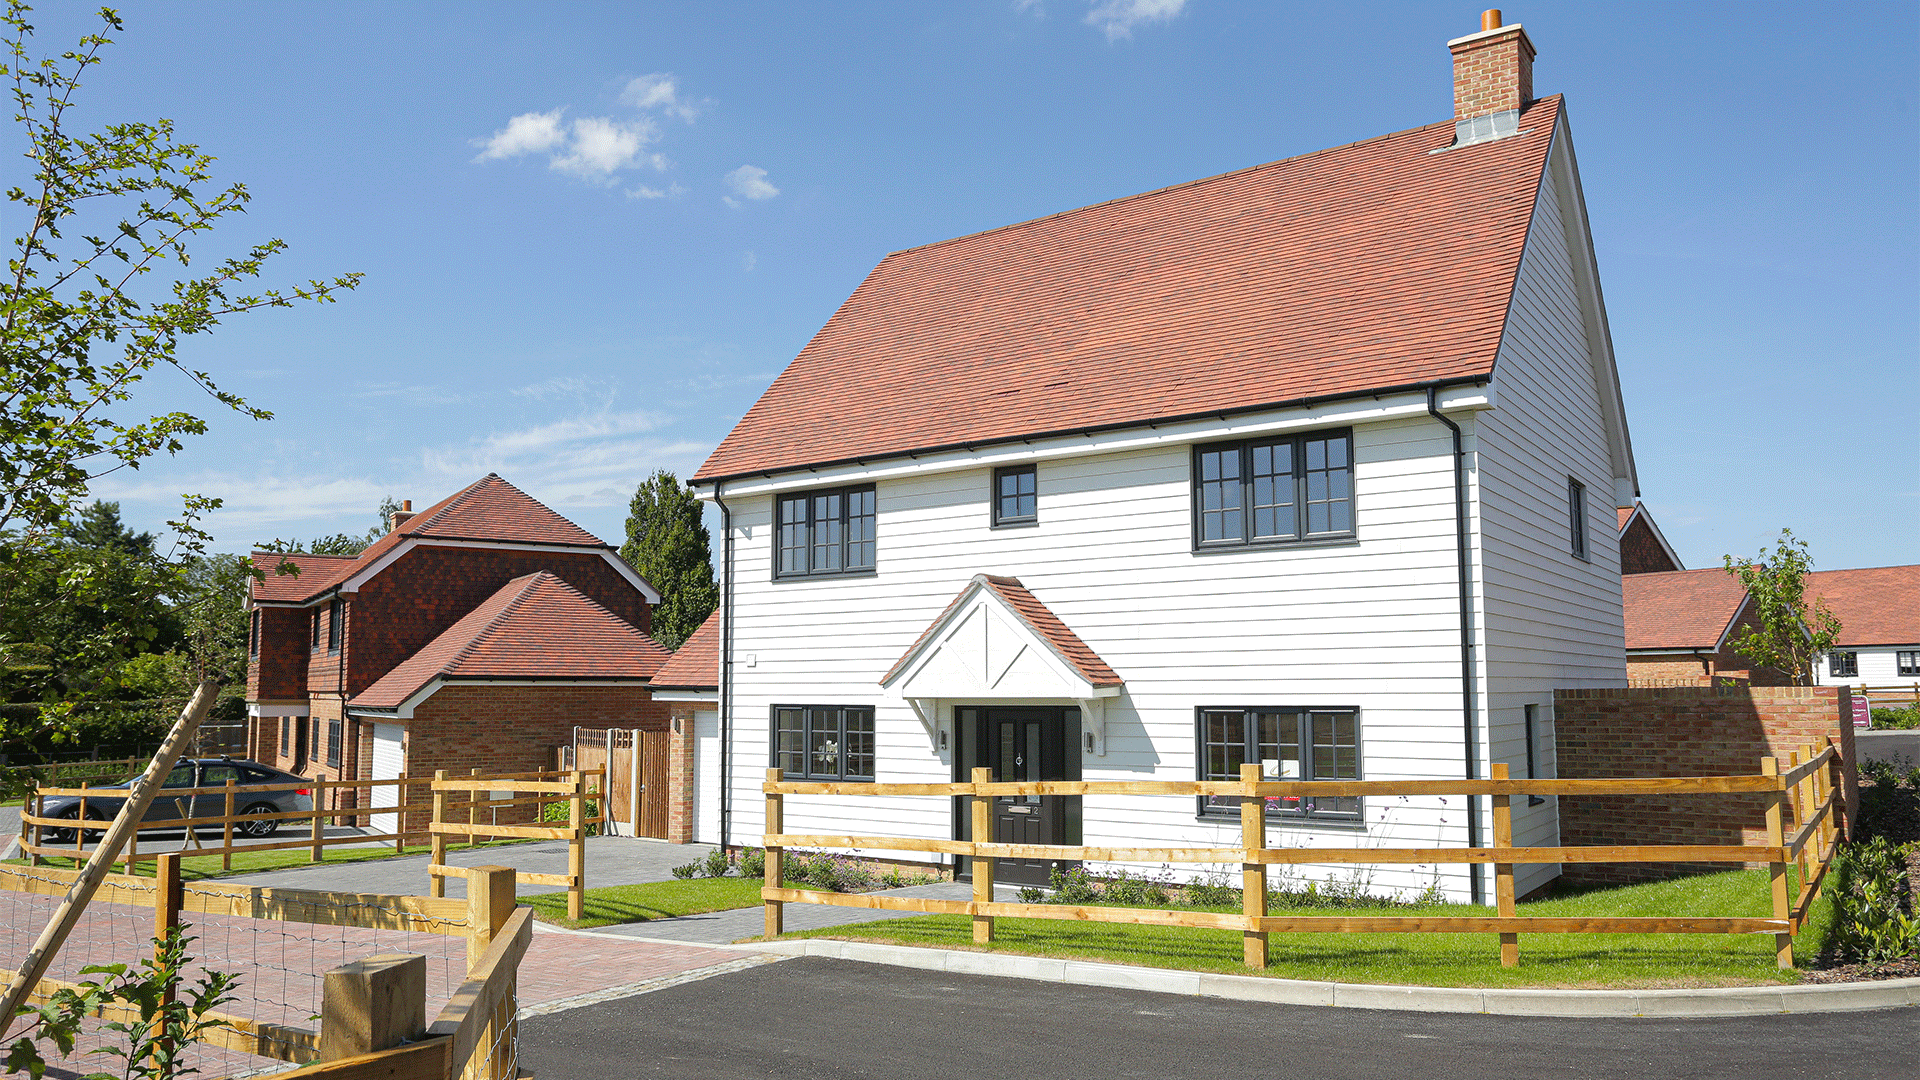 Miller's Meadow Street View featured a large white detached house on a sunny road